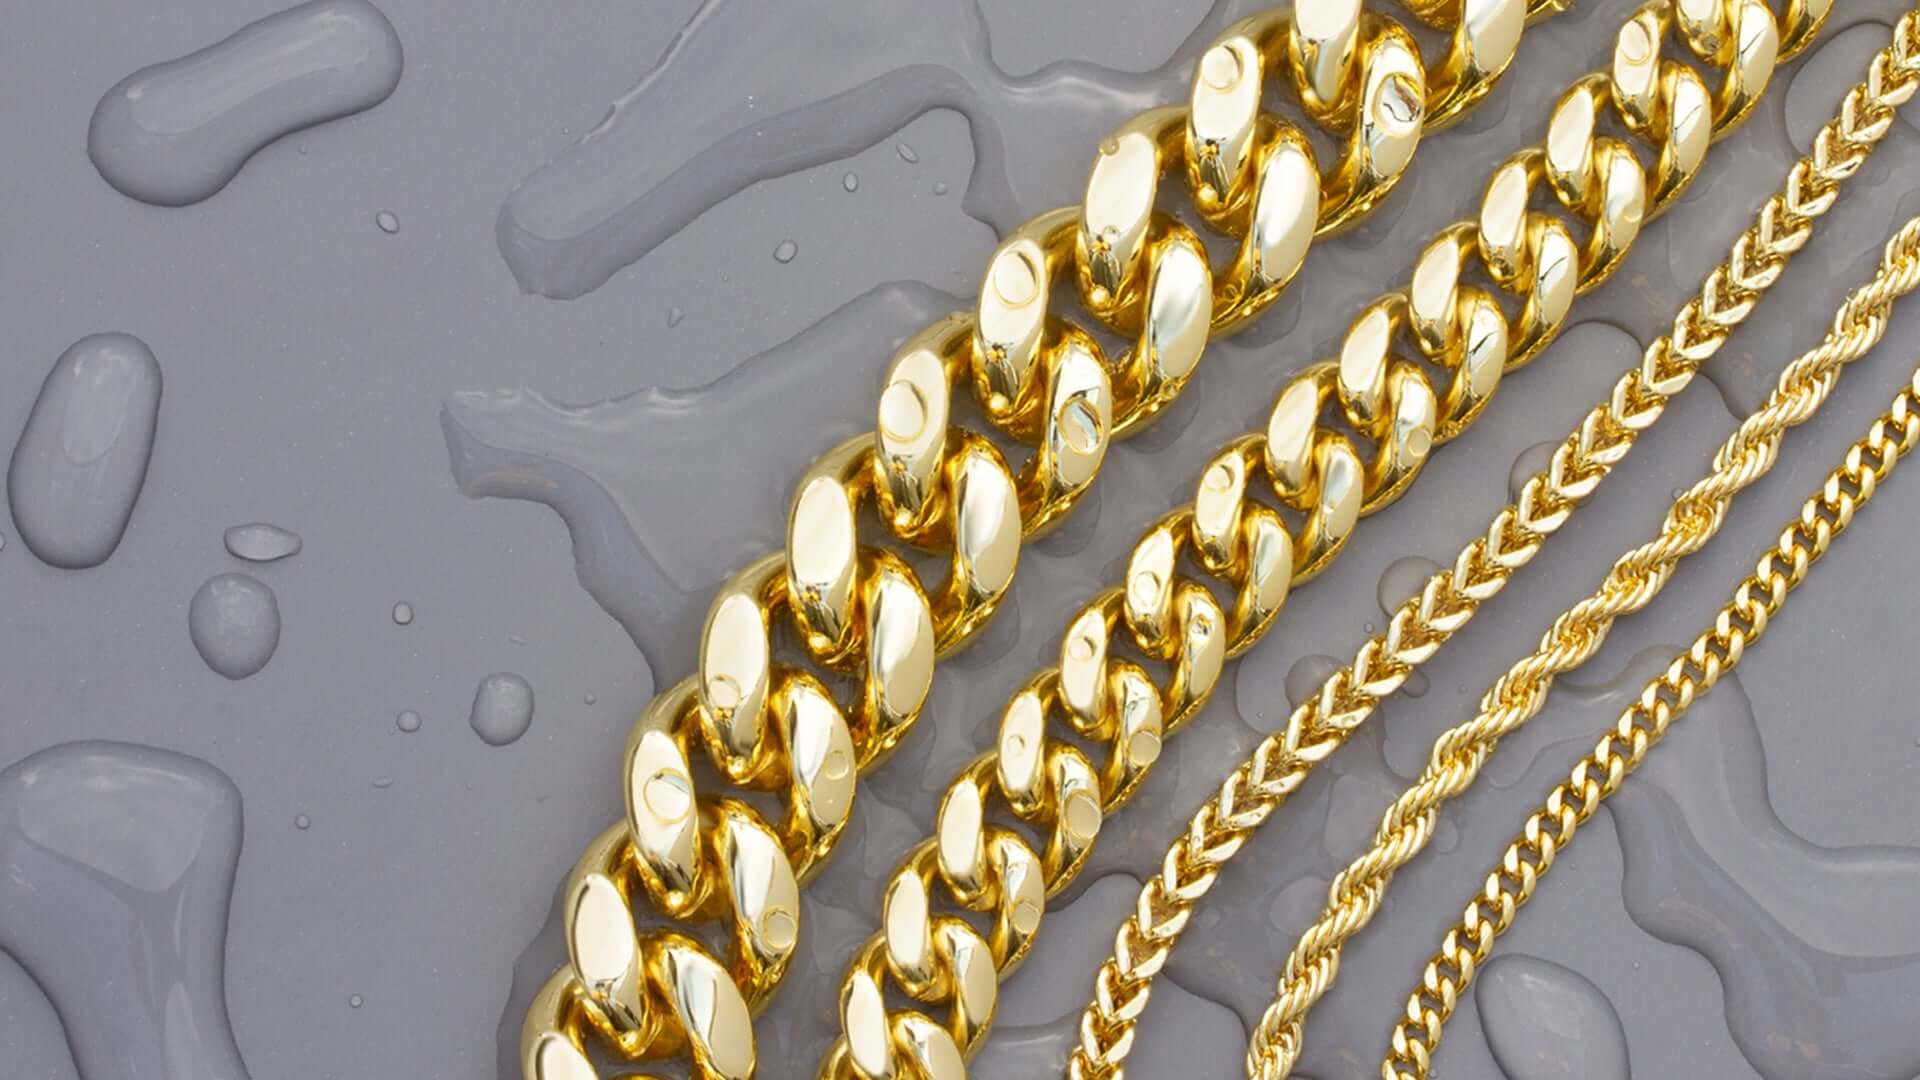 Water and tarnish resistant chains